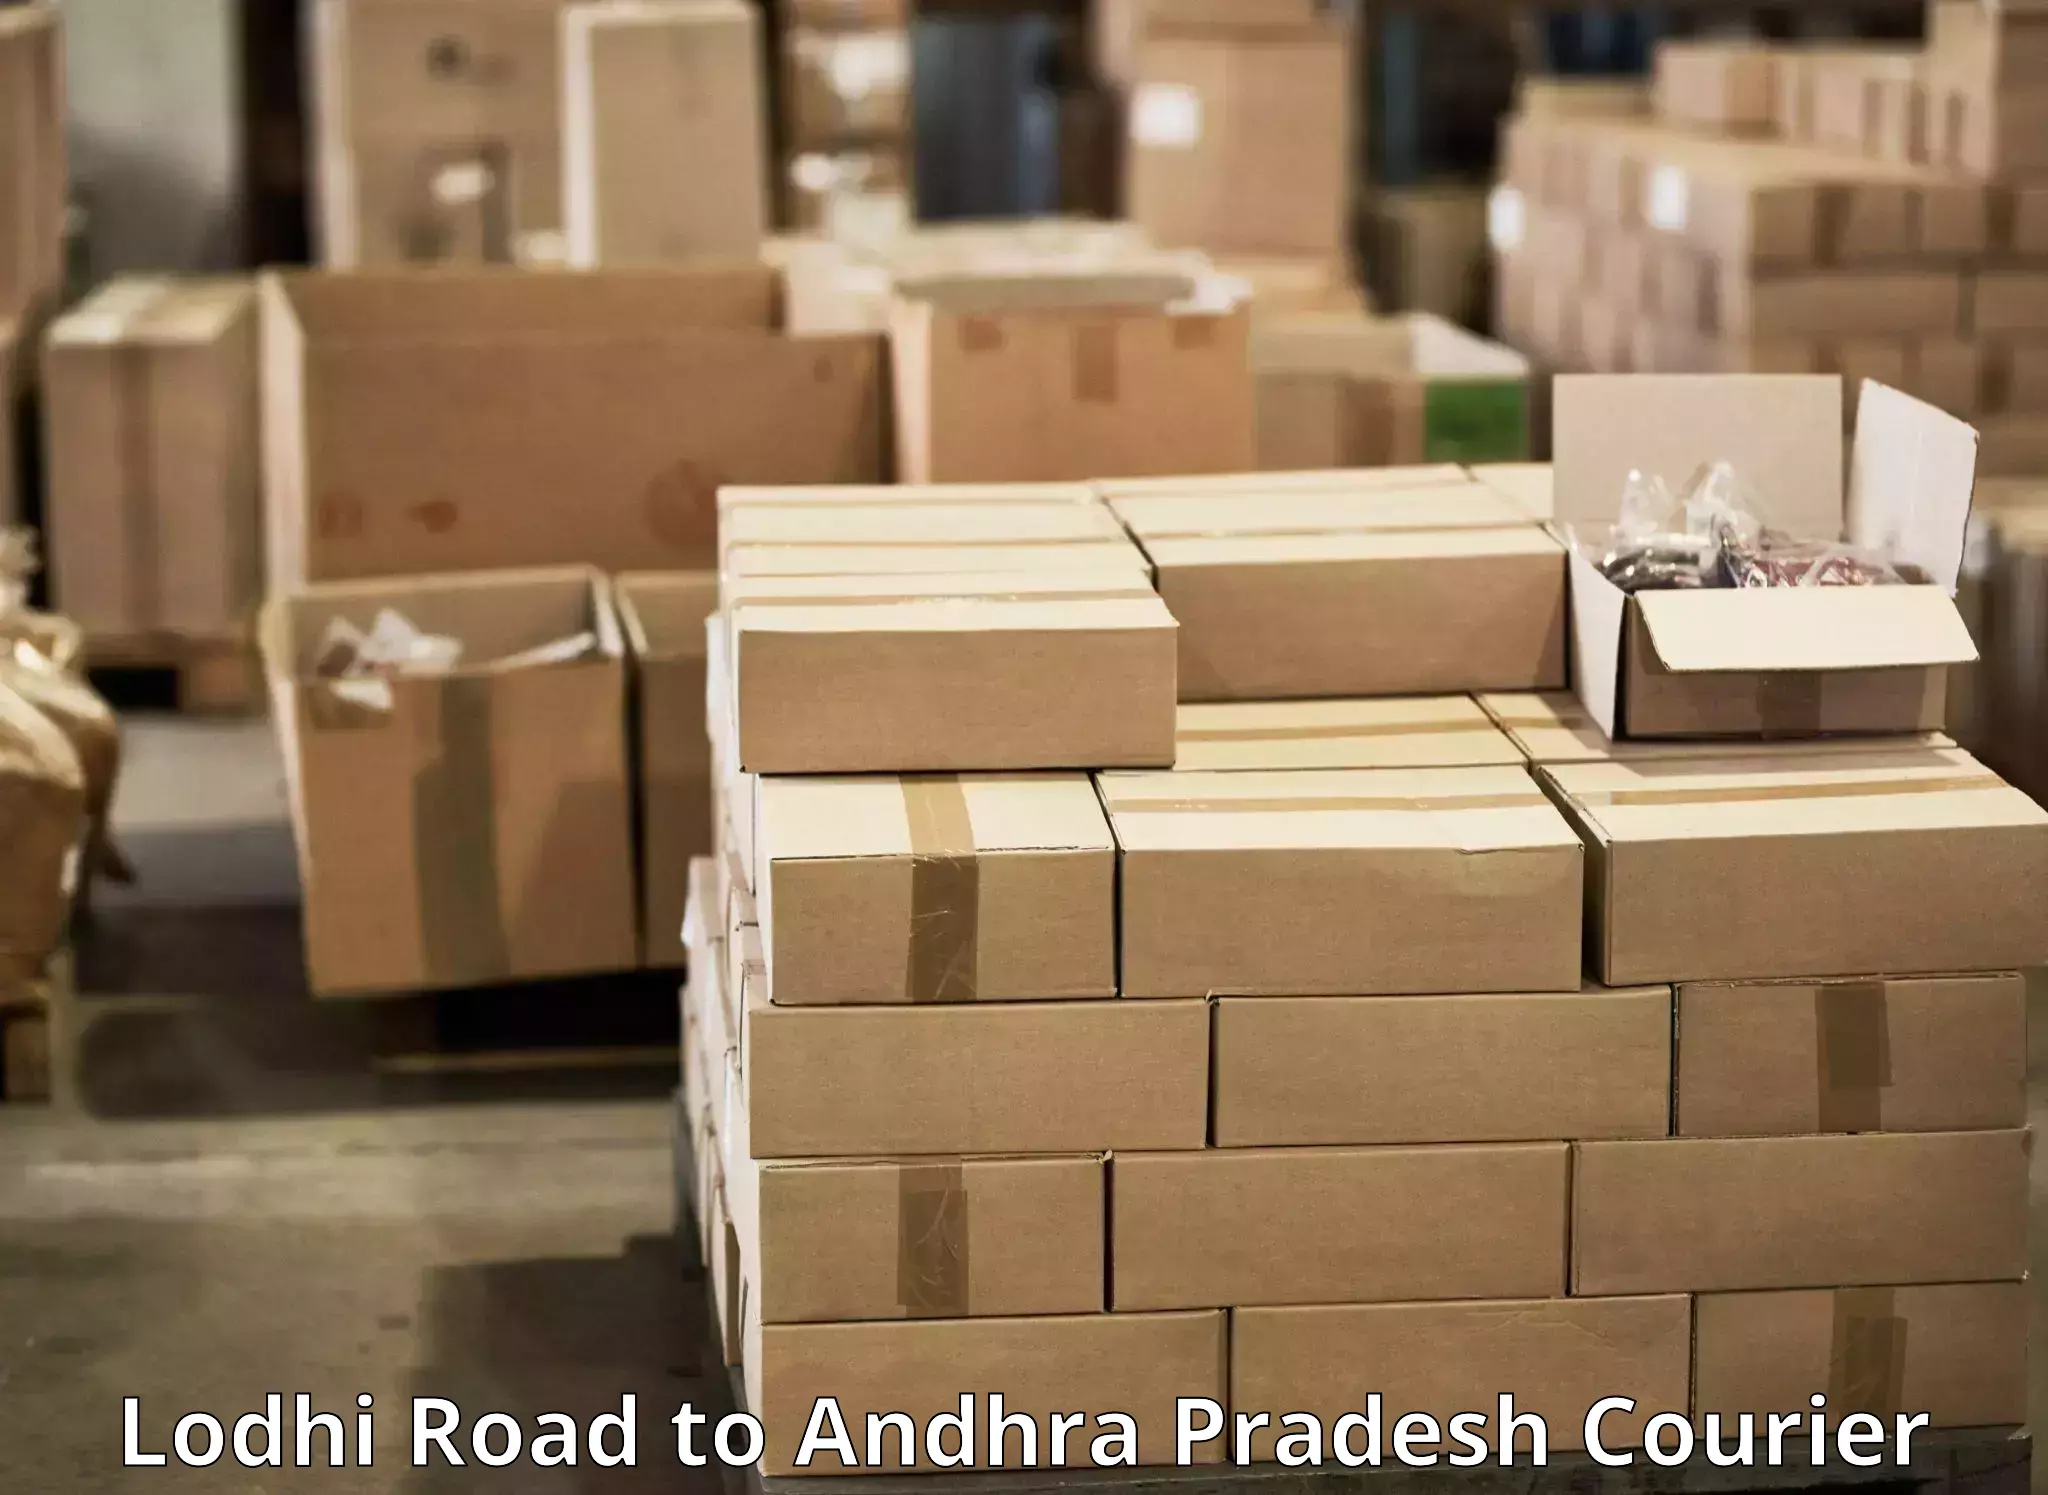 Speedy delivery service Lodhi Road to Kandukur